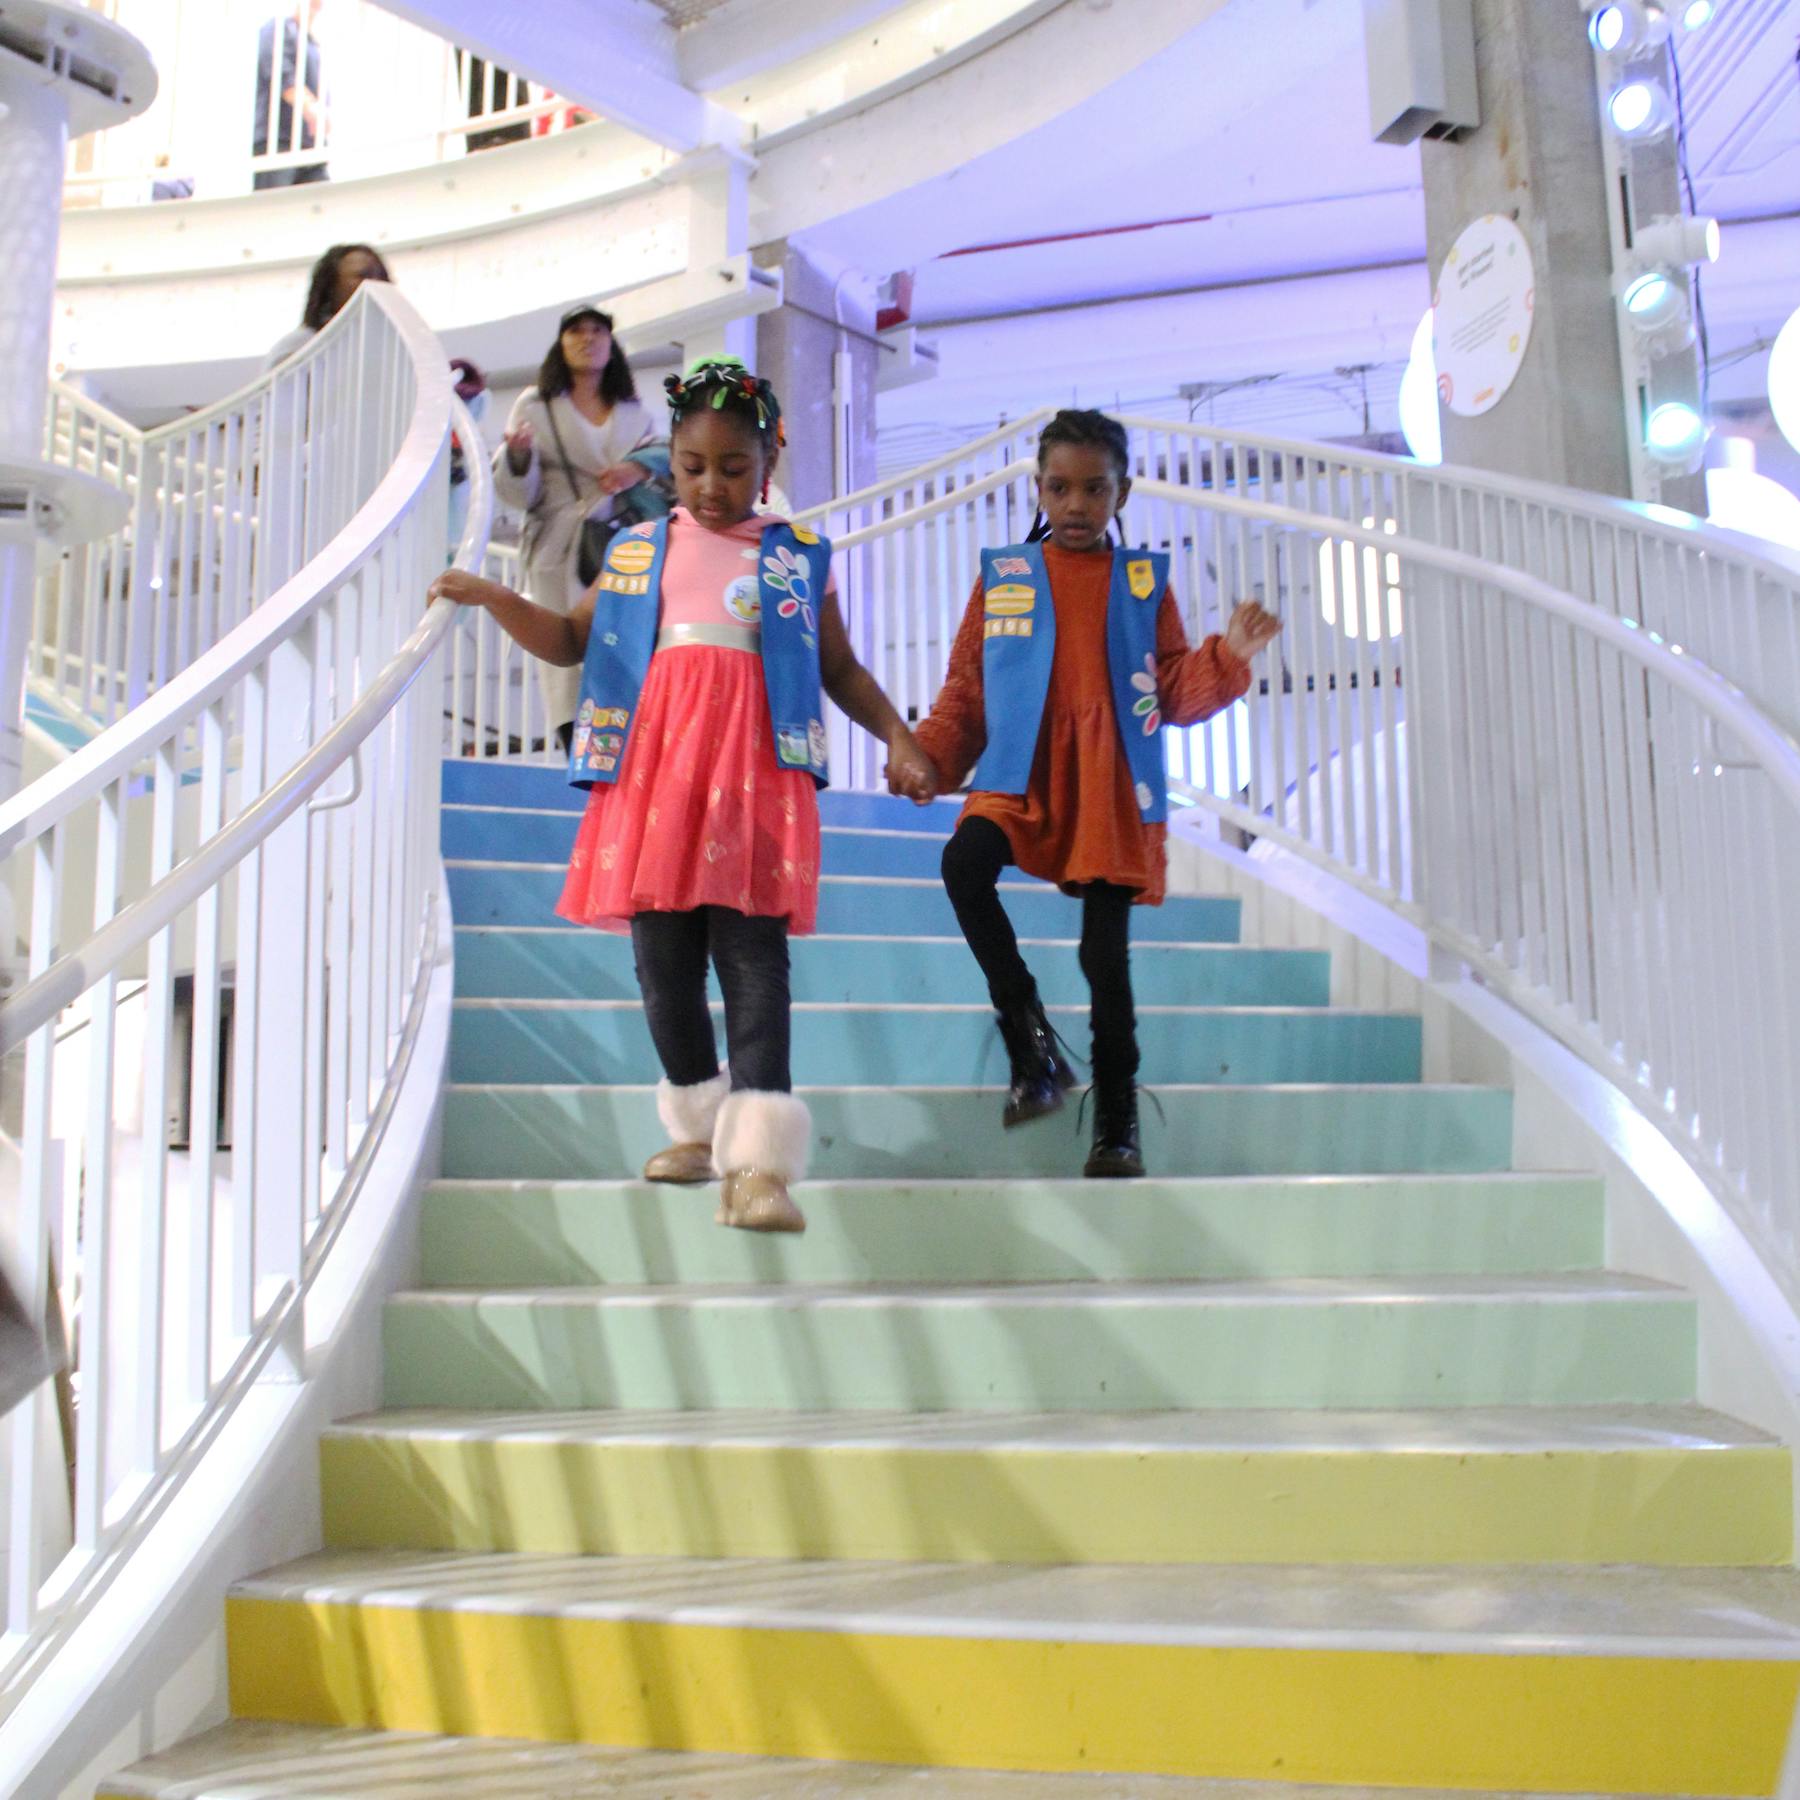 Two girl scouts entering the Museum on the rainbow stairs